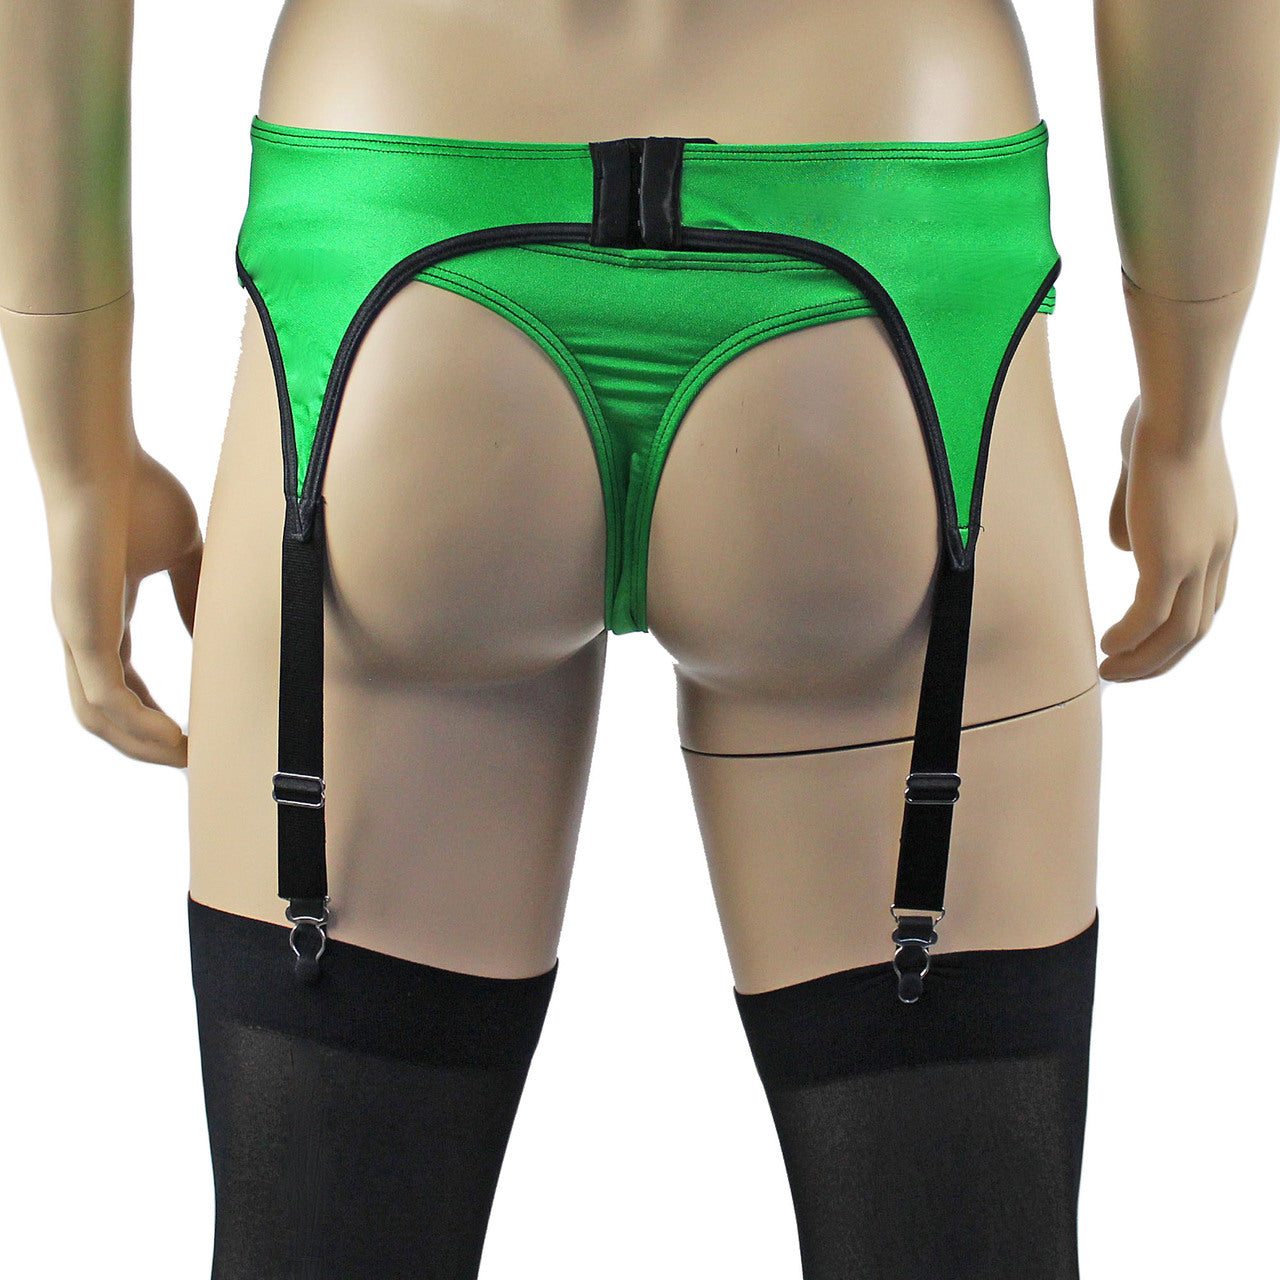 Mens Risque Garterbelt, Thong & Stockings (green and black plus other colours)